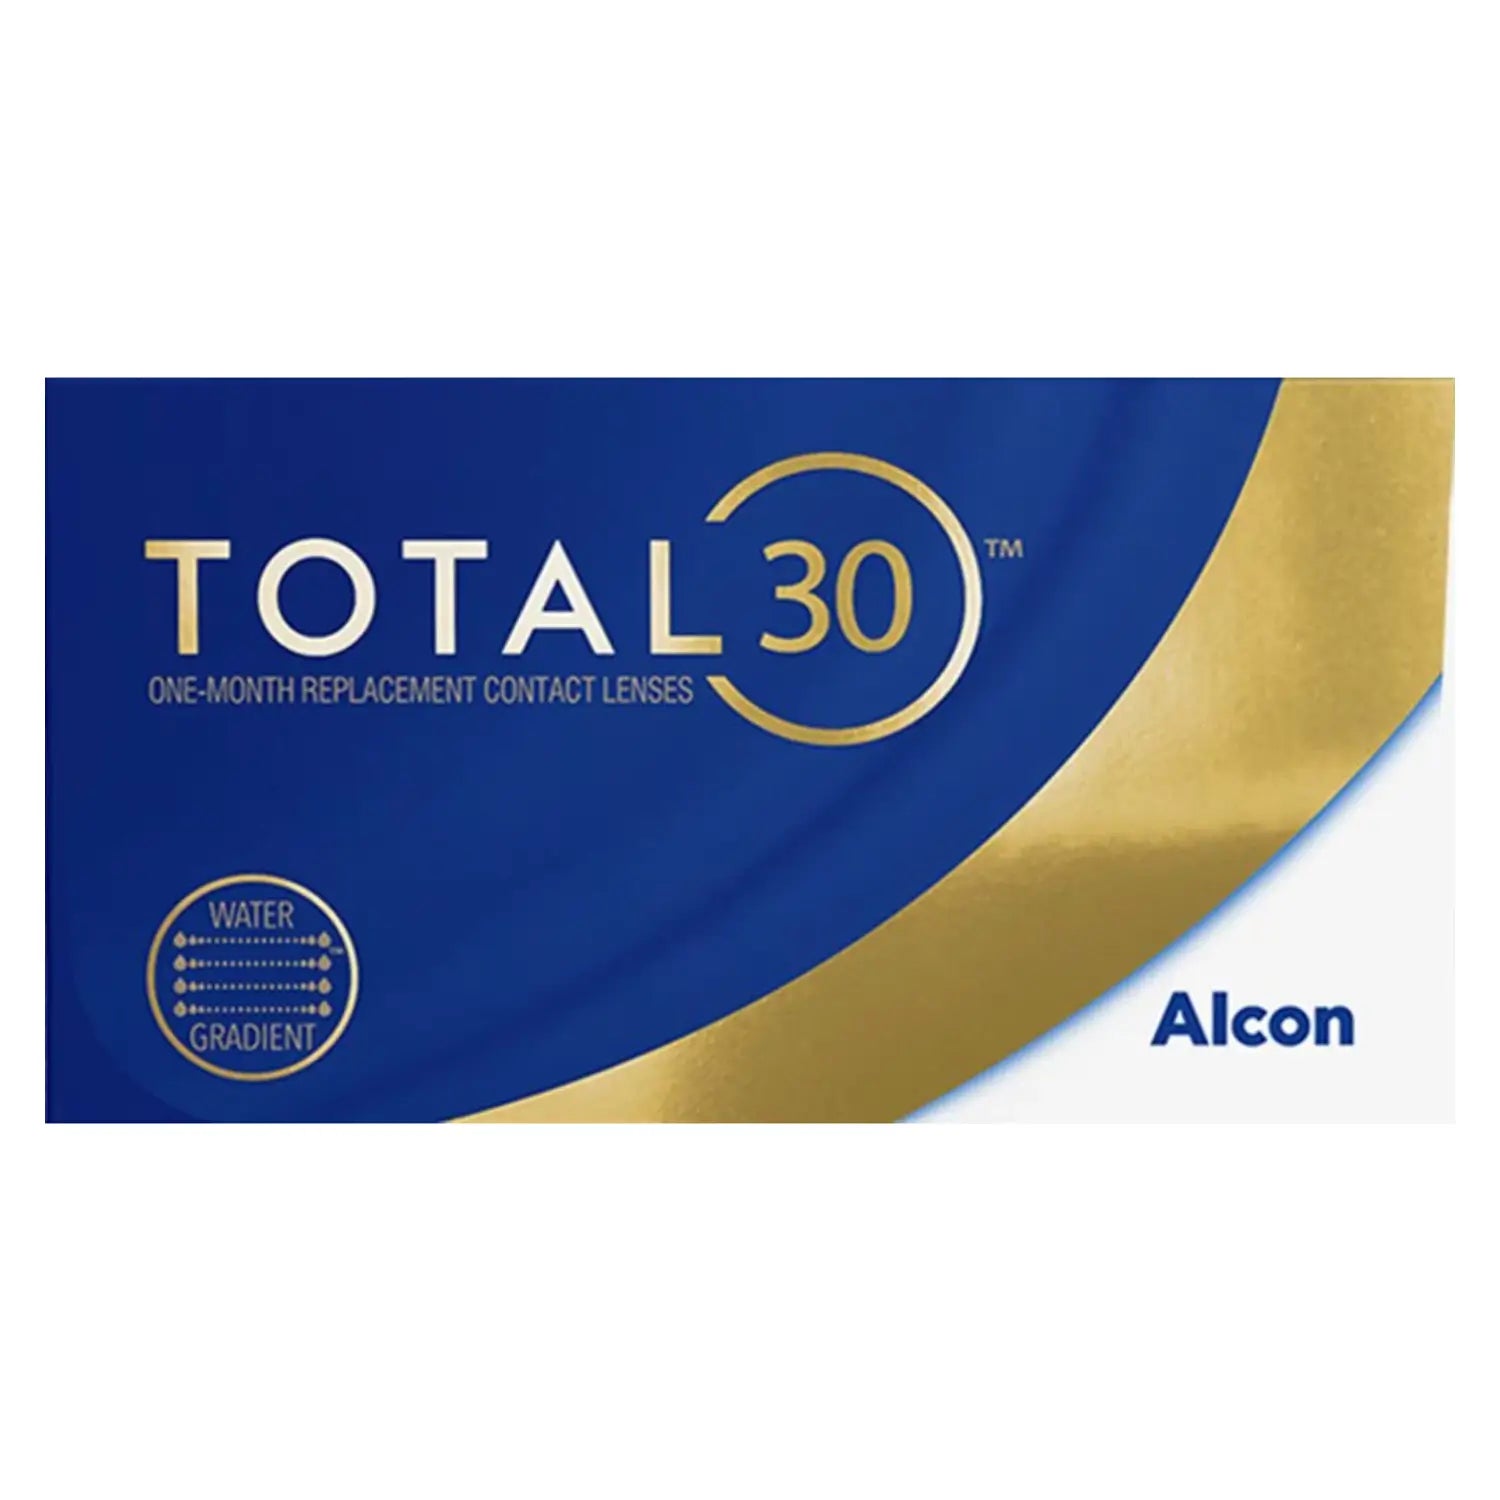 Total 30 certified contact lenses online at low price